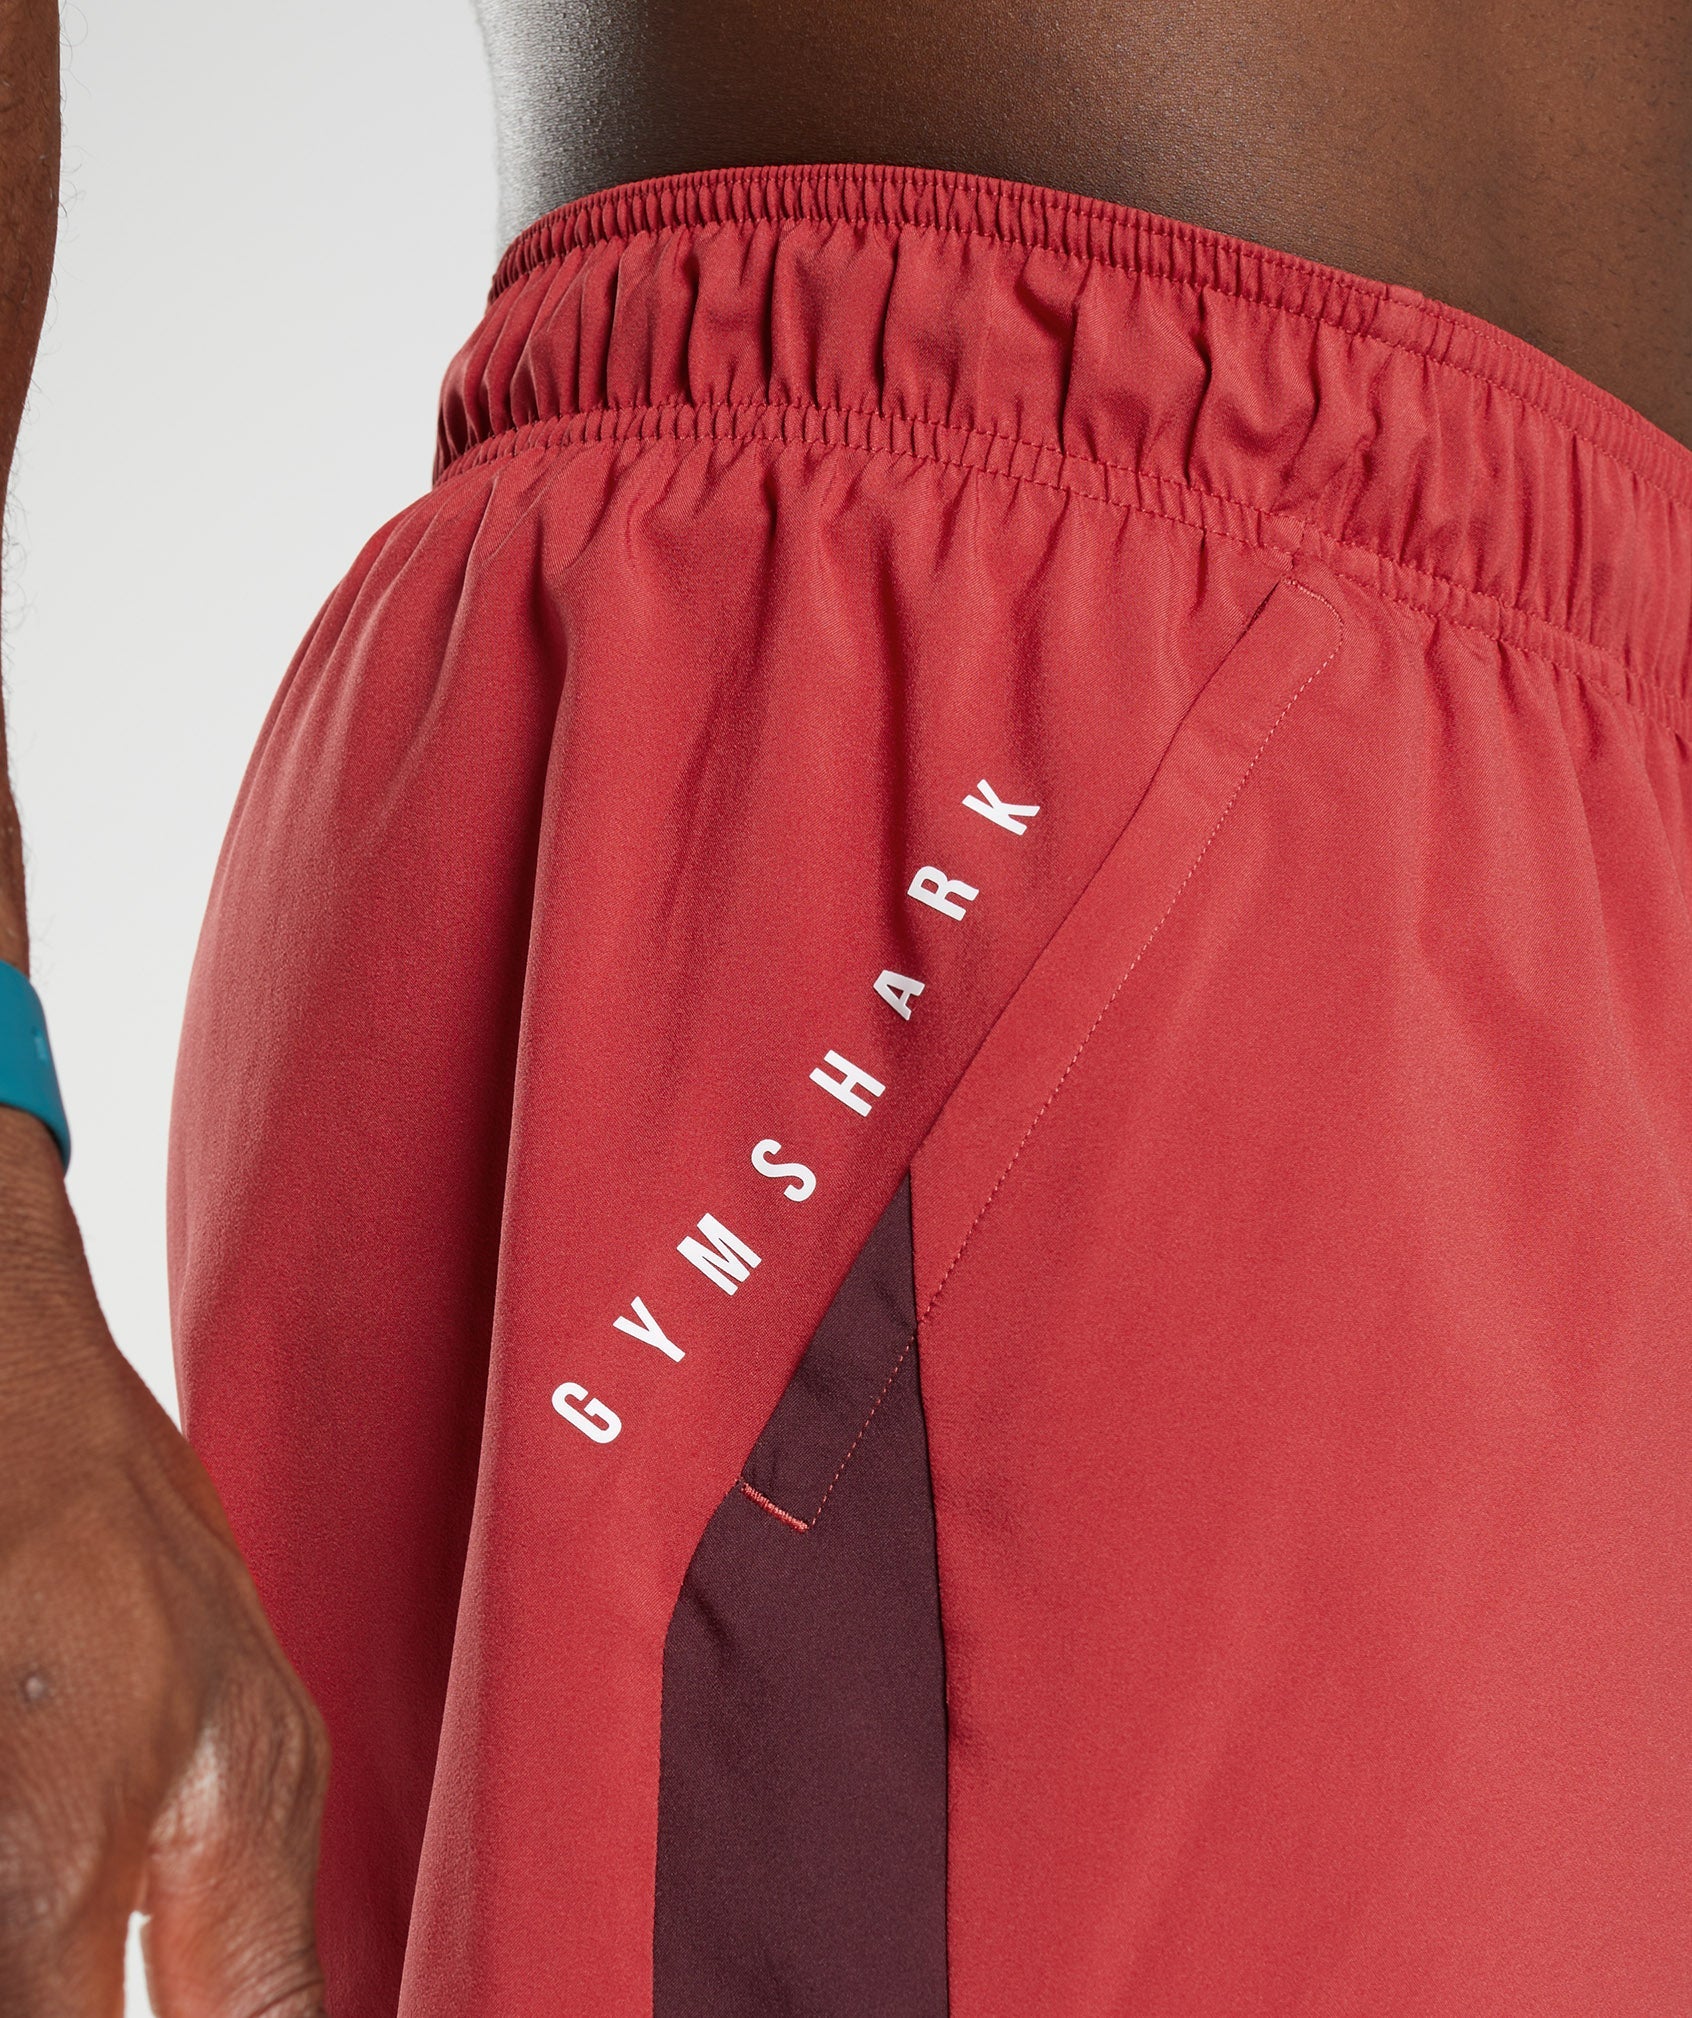 Sport 5" Shorts in Salsa Red/ Baked Maroon